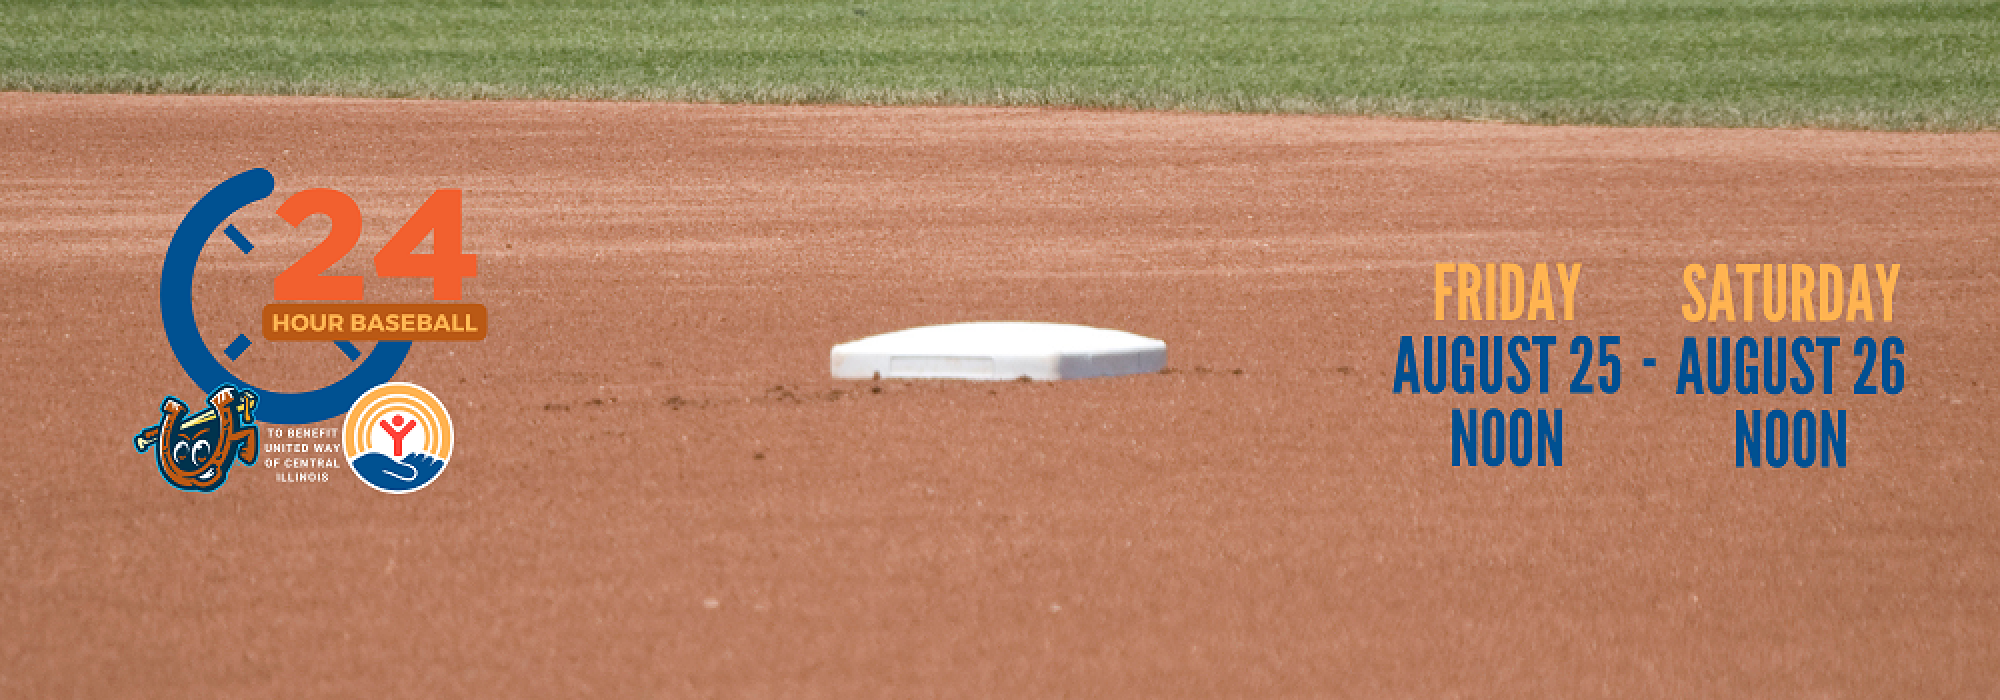 baseball pitchers mound background with dates of Friday, August 25 at noon through Saturday August 26 at noon.